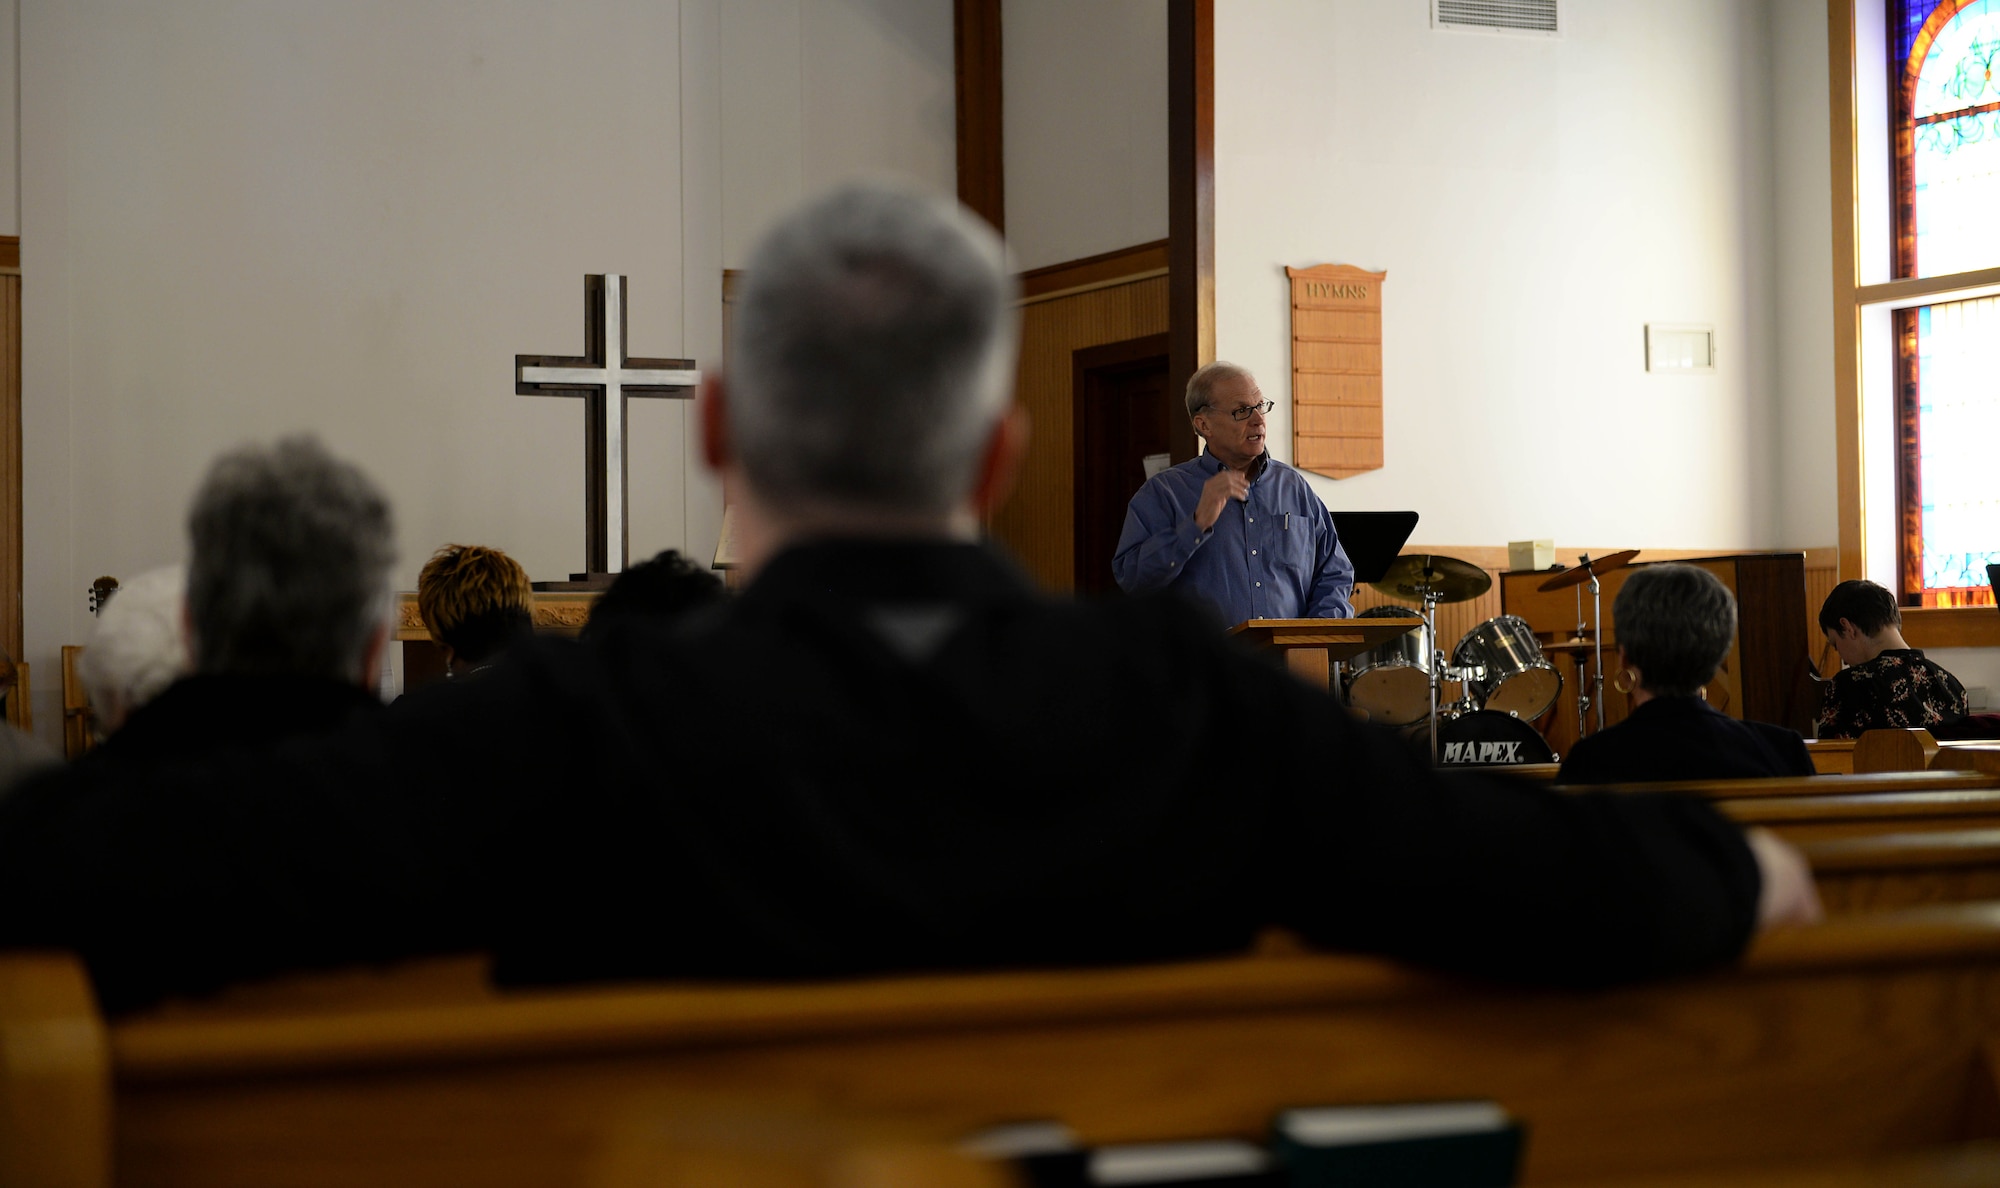 Chaplain (Col.) Doug Slater, Air Education and Training Command chaplain, from Joint Base San Antonio-Randolph, Texas, preaches to attendees during service at the BLAZE Chapel Feb. 24, 2019, on Columbus Air Force Base, Mississippi. Slater was invited by Chaplain (Lt. Col.) Steven Richardson, 14th Flying Training Wing Chaplain, to preach his fini-sermon at Columbus AFB chapel, ending his nearly 30-year career back in the pulpit. (U.S. Air Force photo by Airman Hannah Bean)